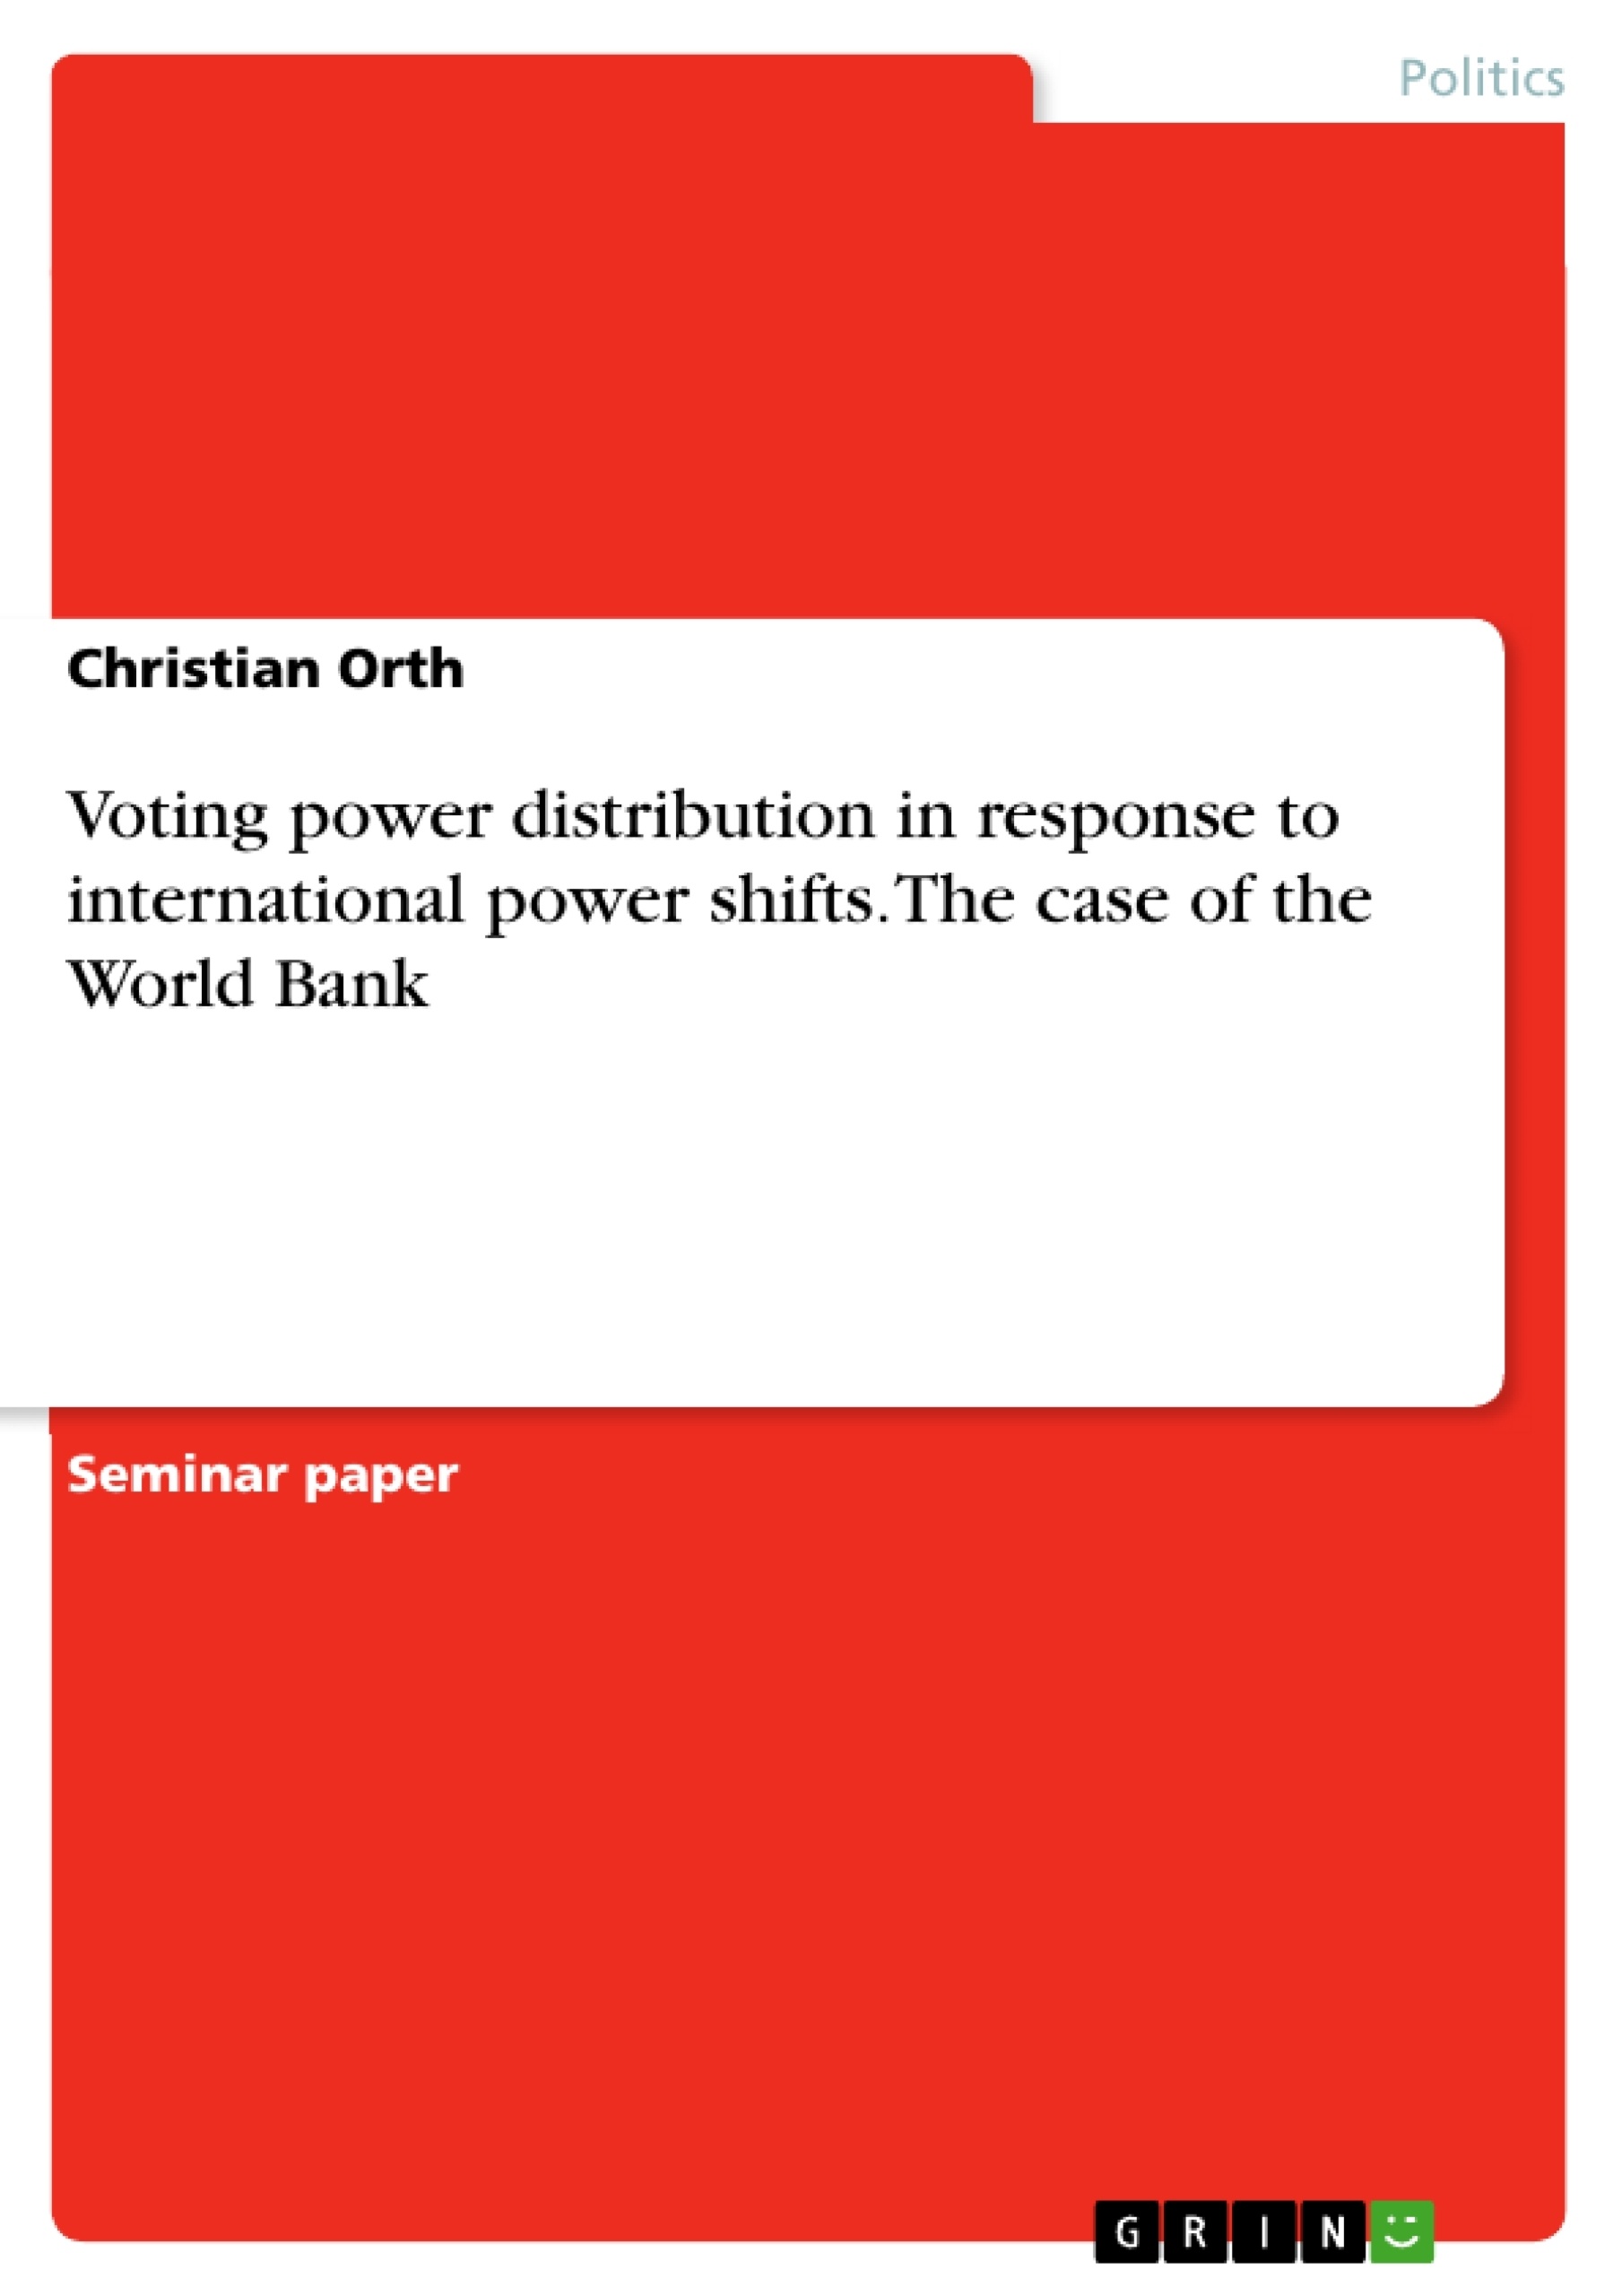 Titel: Voting power distribution in response to international power shifts. The case of the World Bank